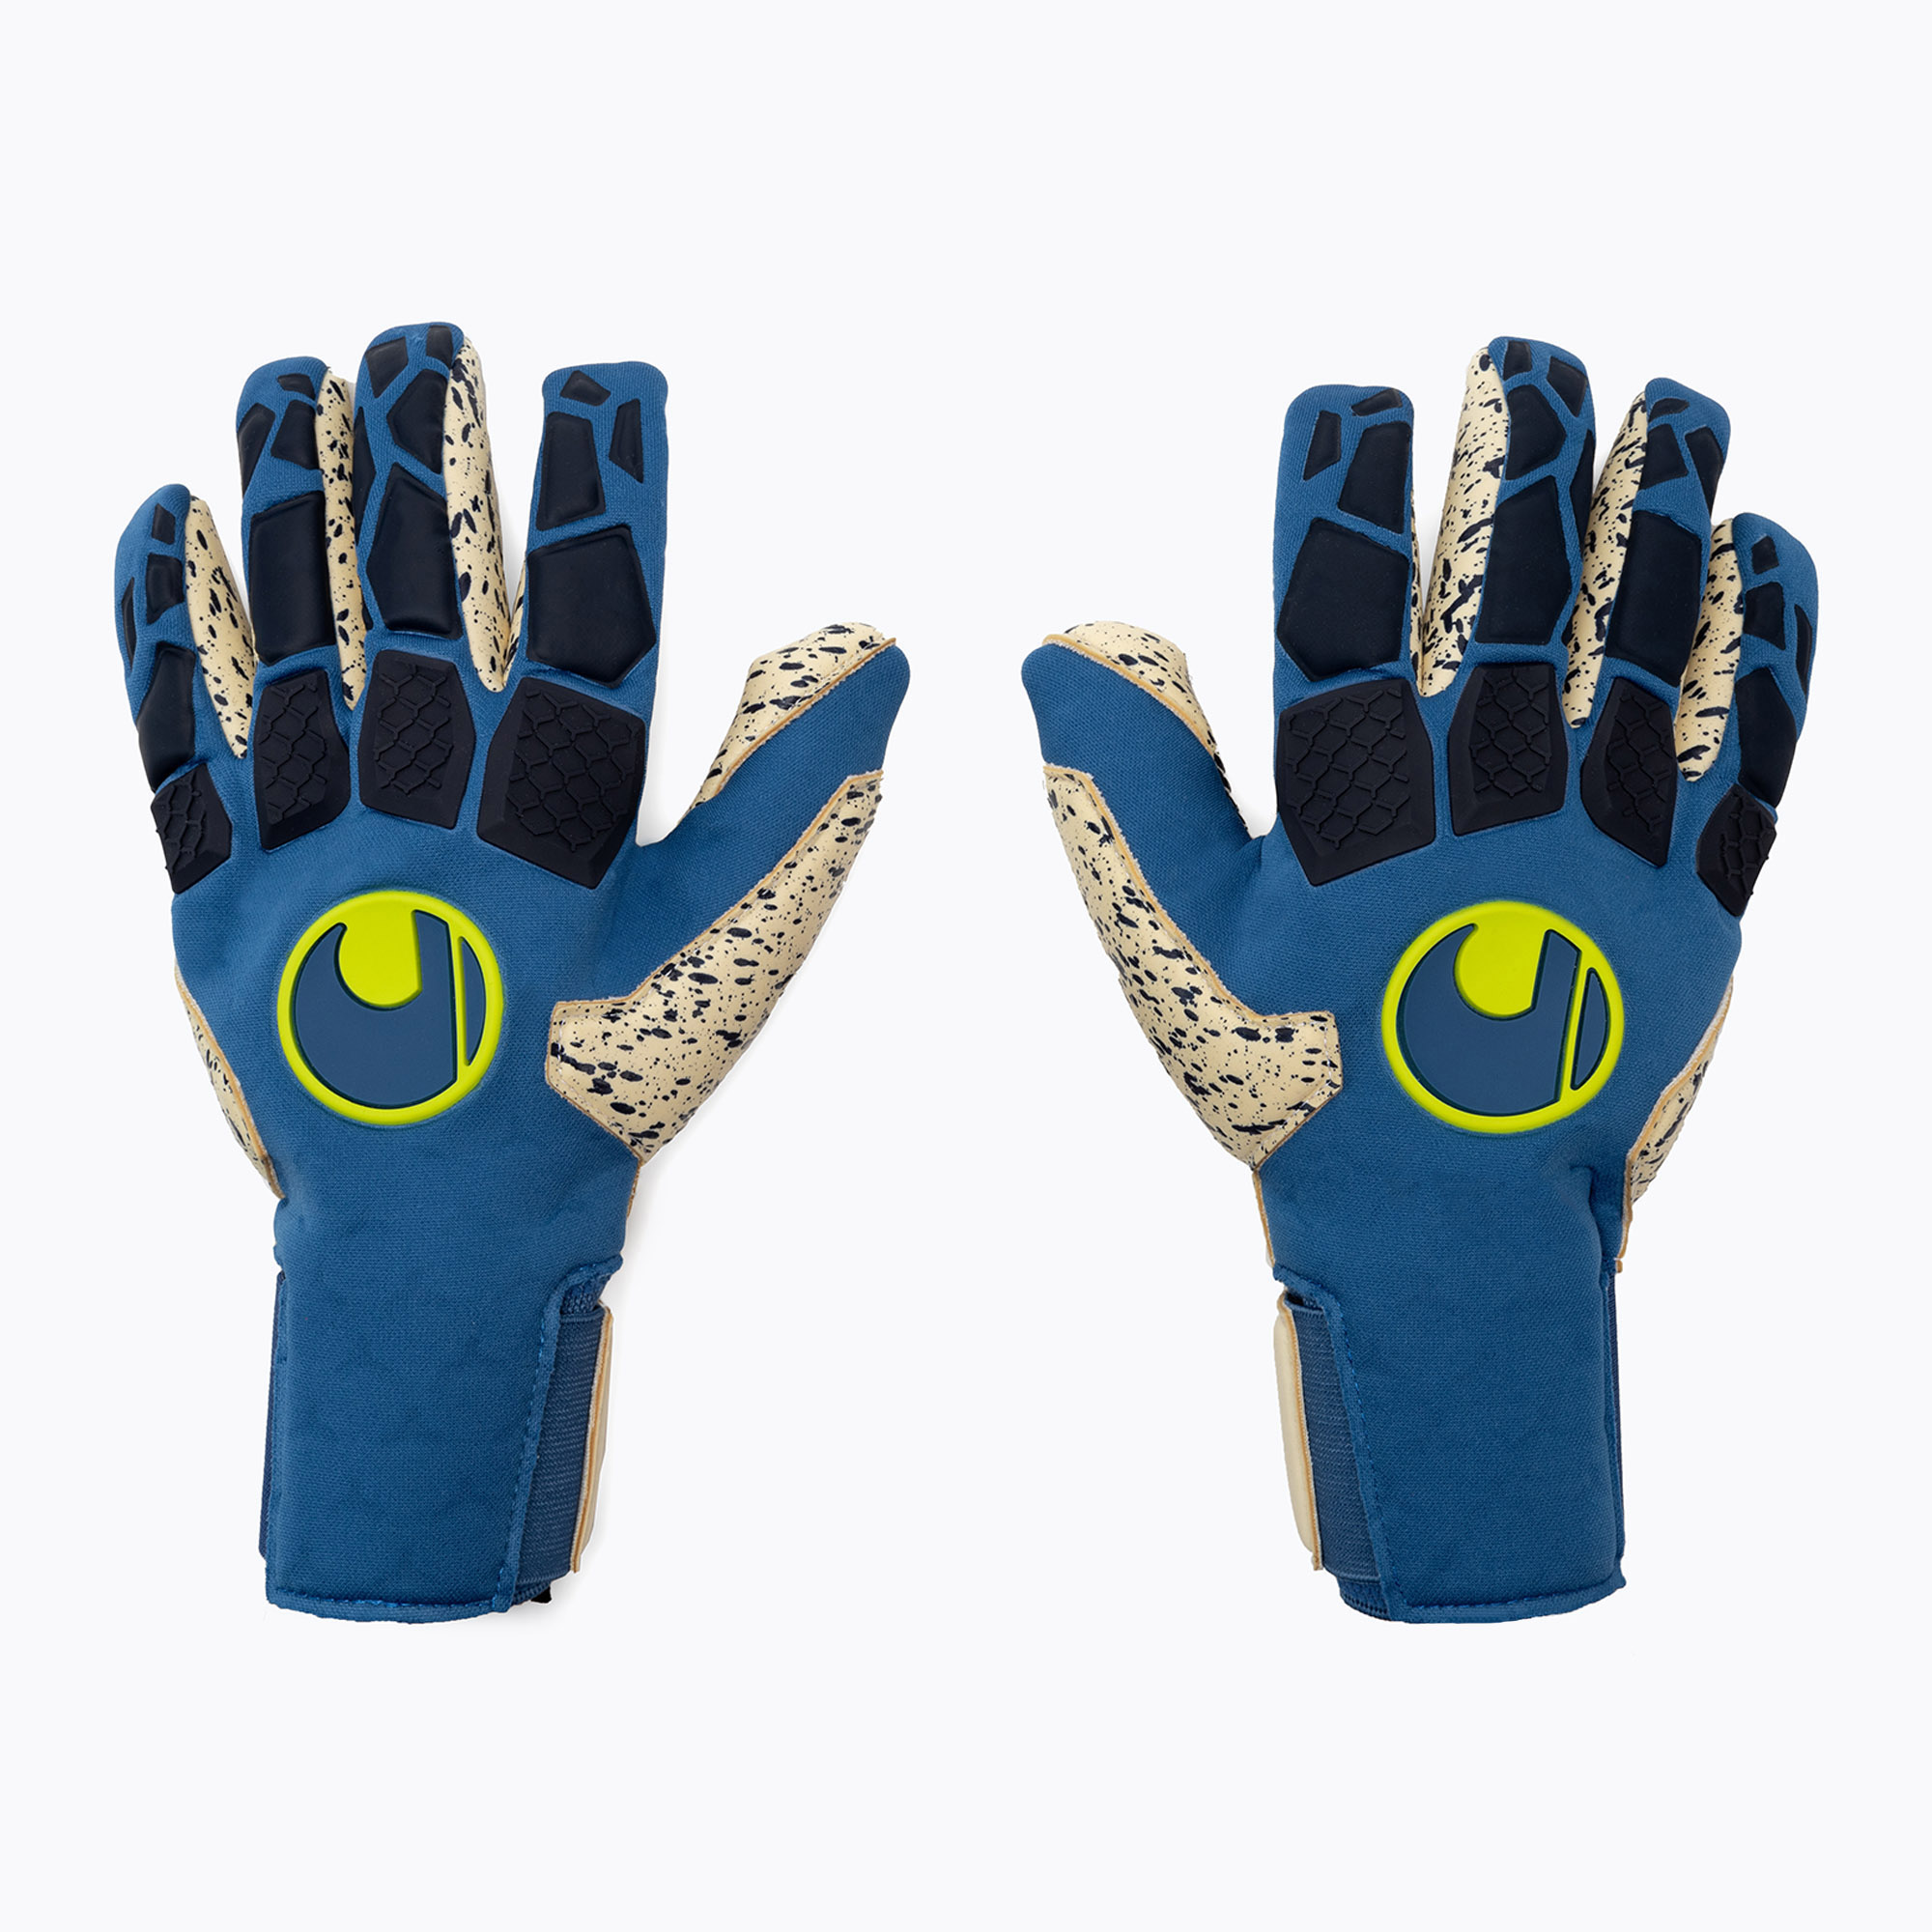 Uhlsport Hyperact Supergrip  Finger Surround вратарска ръкавица синьо и бяло 101123101